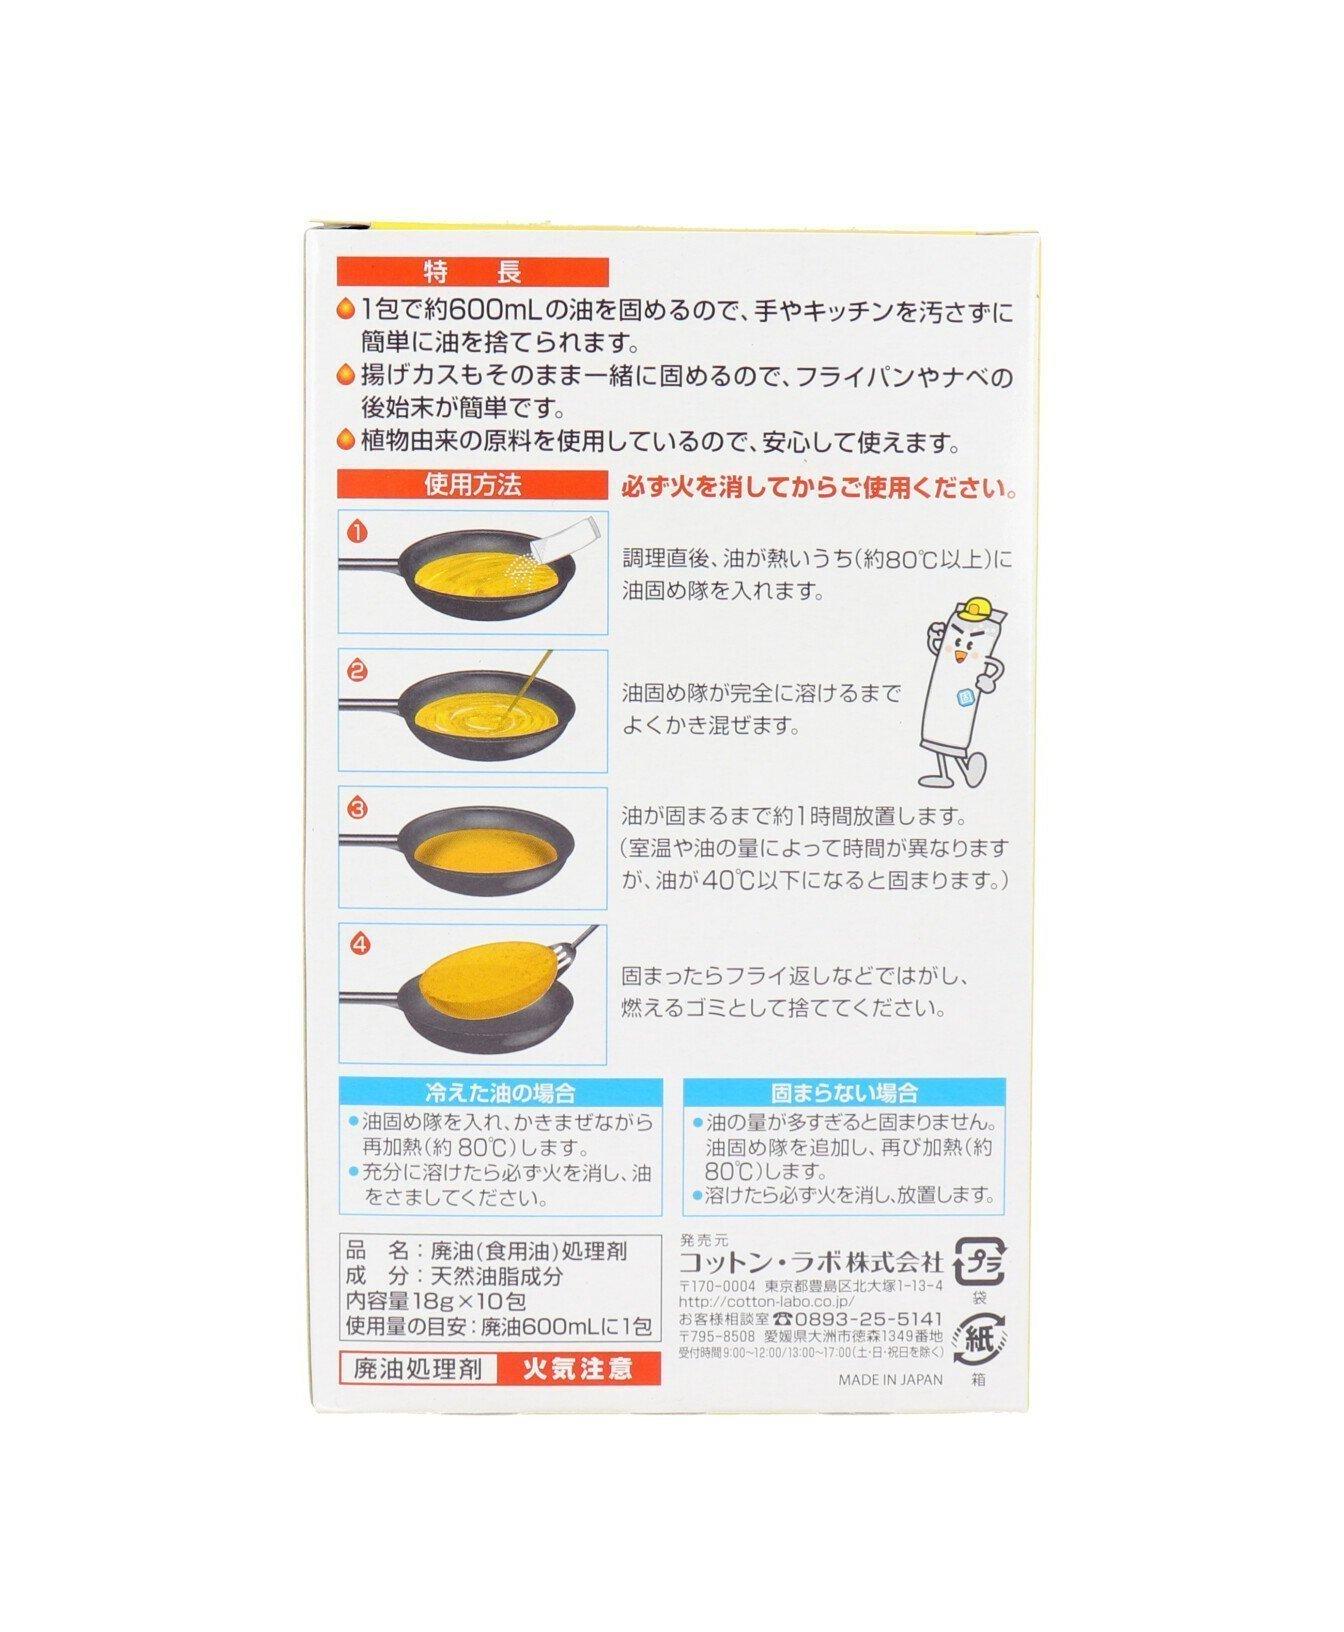  LANBEIDE Cooking Oil Solidifier Powder, Solidifies Up To 36  Cups